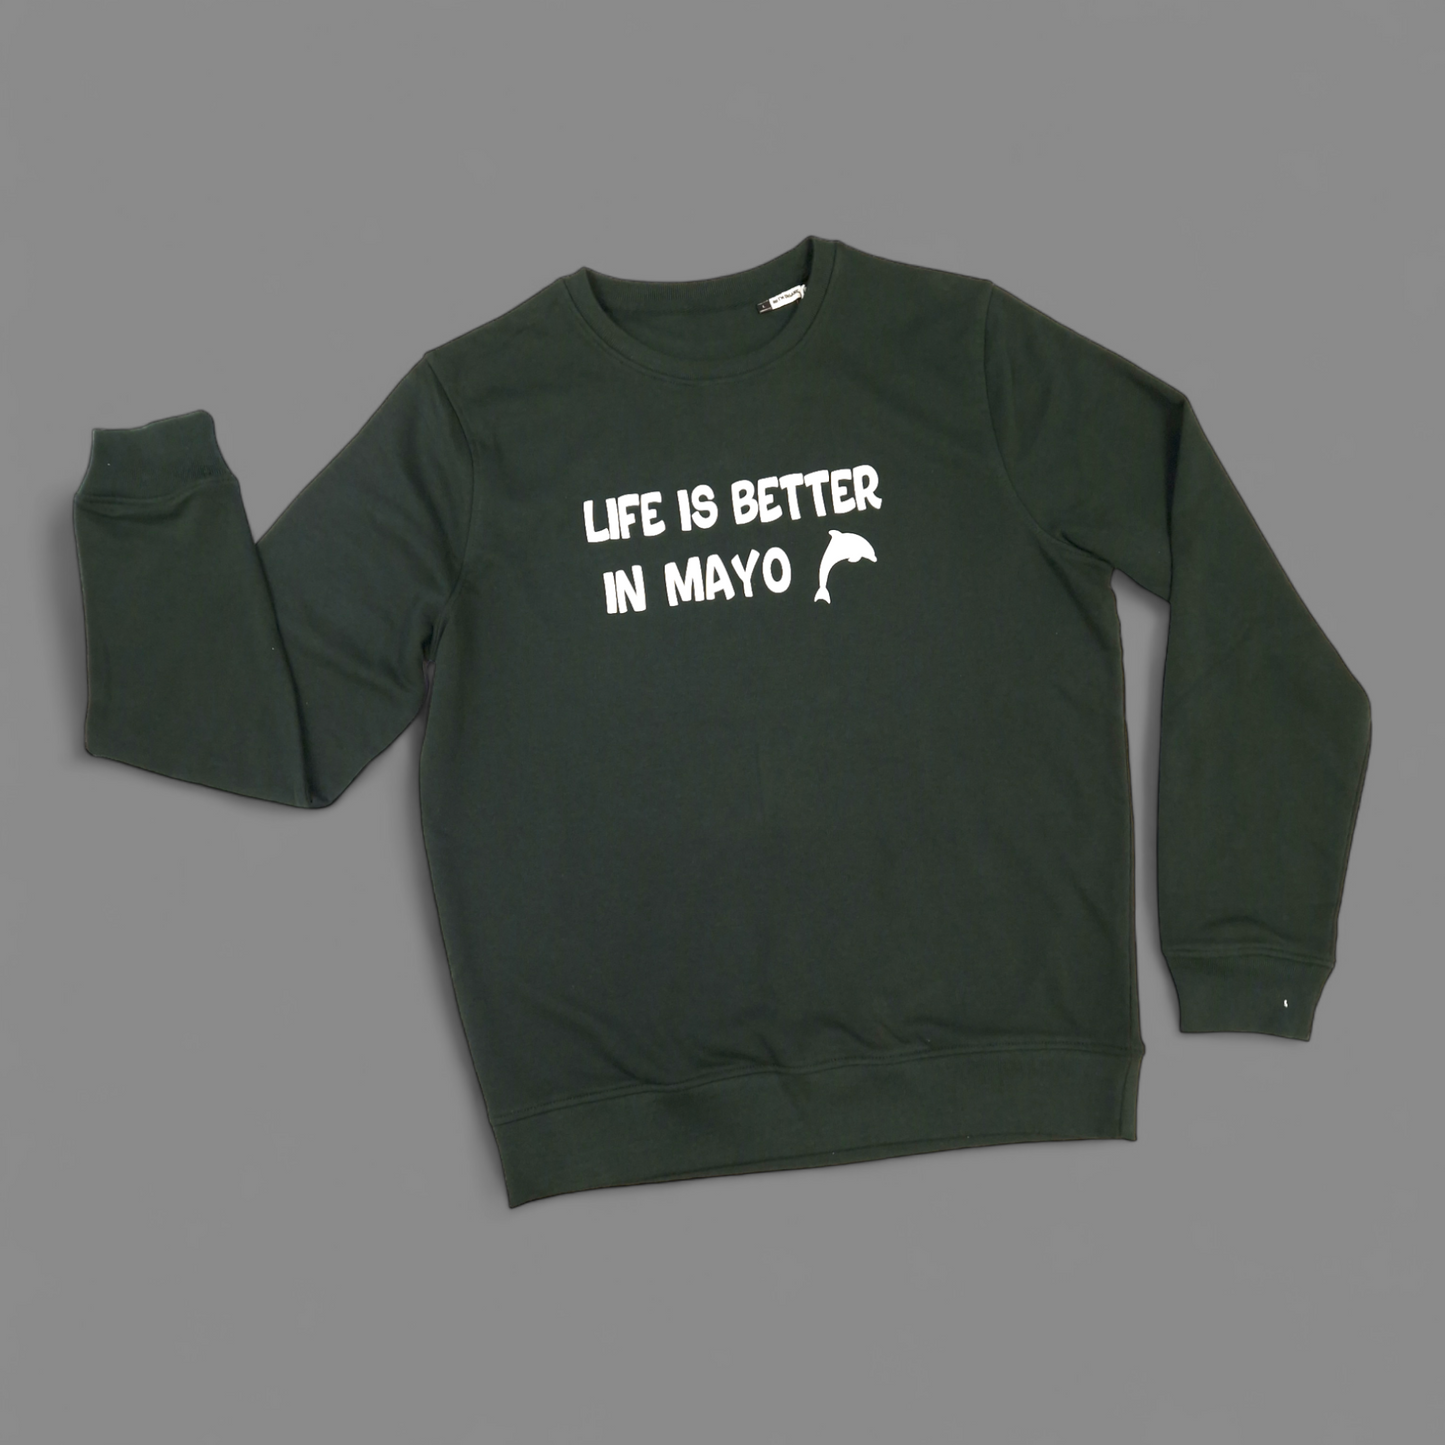 Sweatshirt - Adult L - Life is better in Mayo (Dolphin) - Green